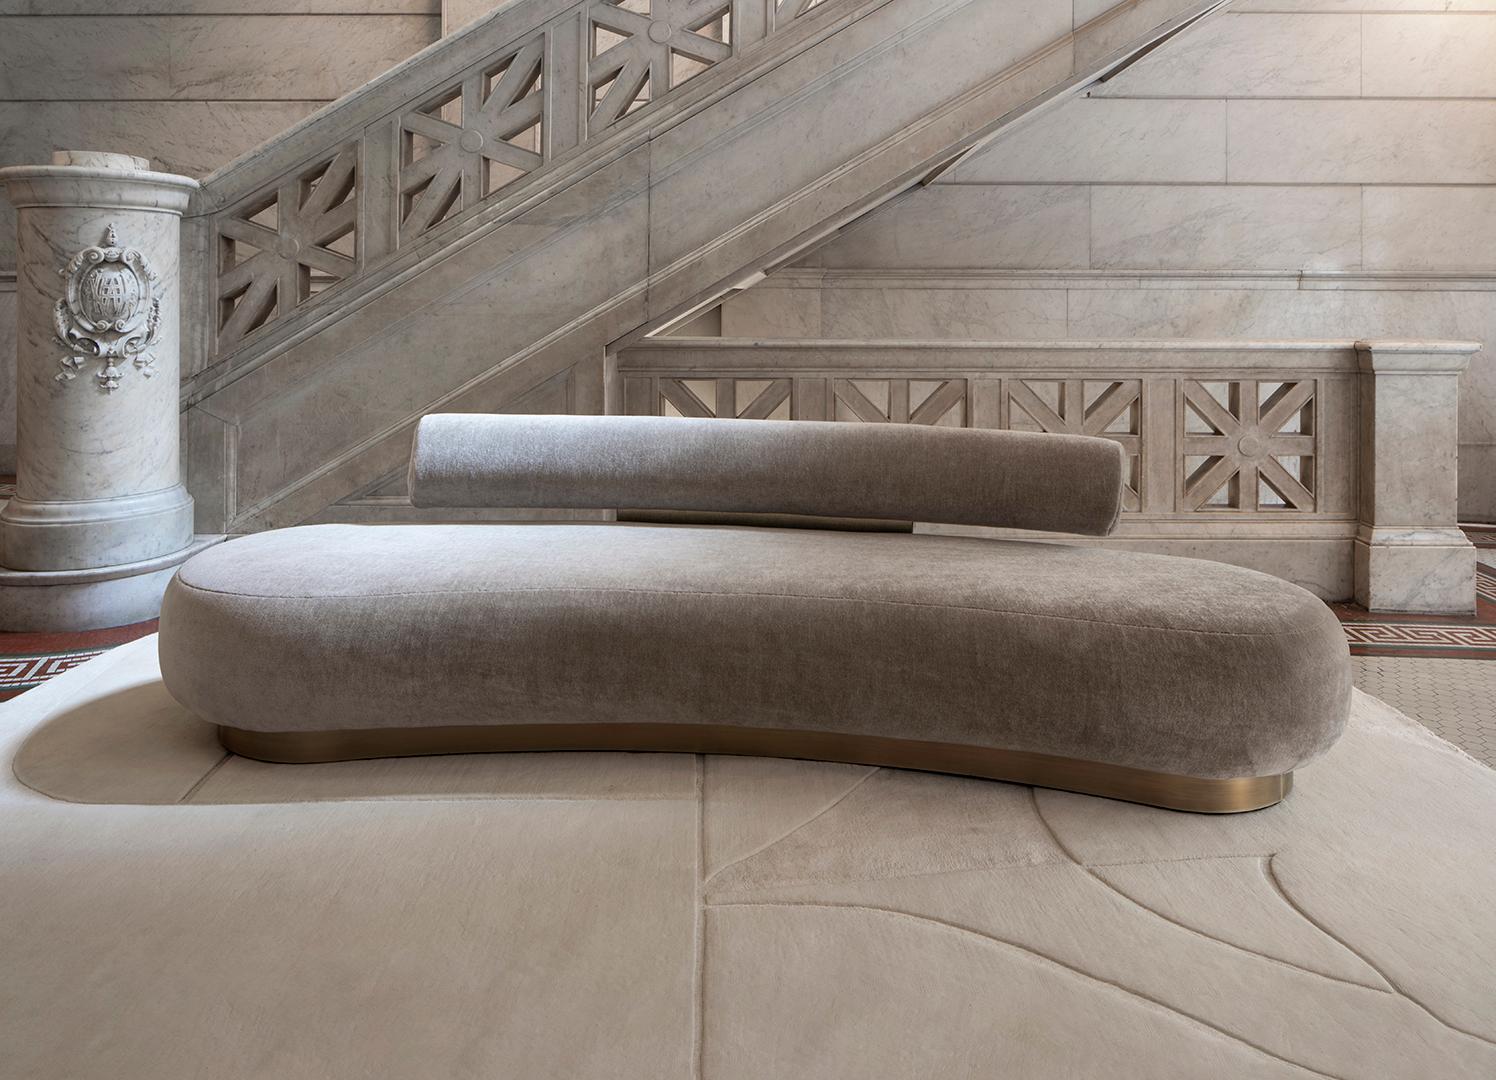 The Claudia Afshar Collection by Claudia Afshar

The gentle curves and silhouette of the human body sparked the vision for this luxurious, oval-shaped rug. With its extreme pile heights that create incredible shadowing and depth, Contour stands